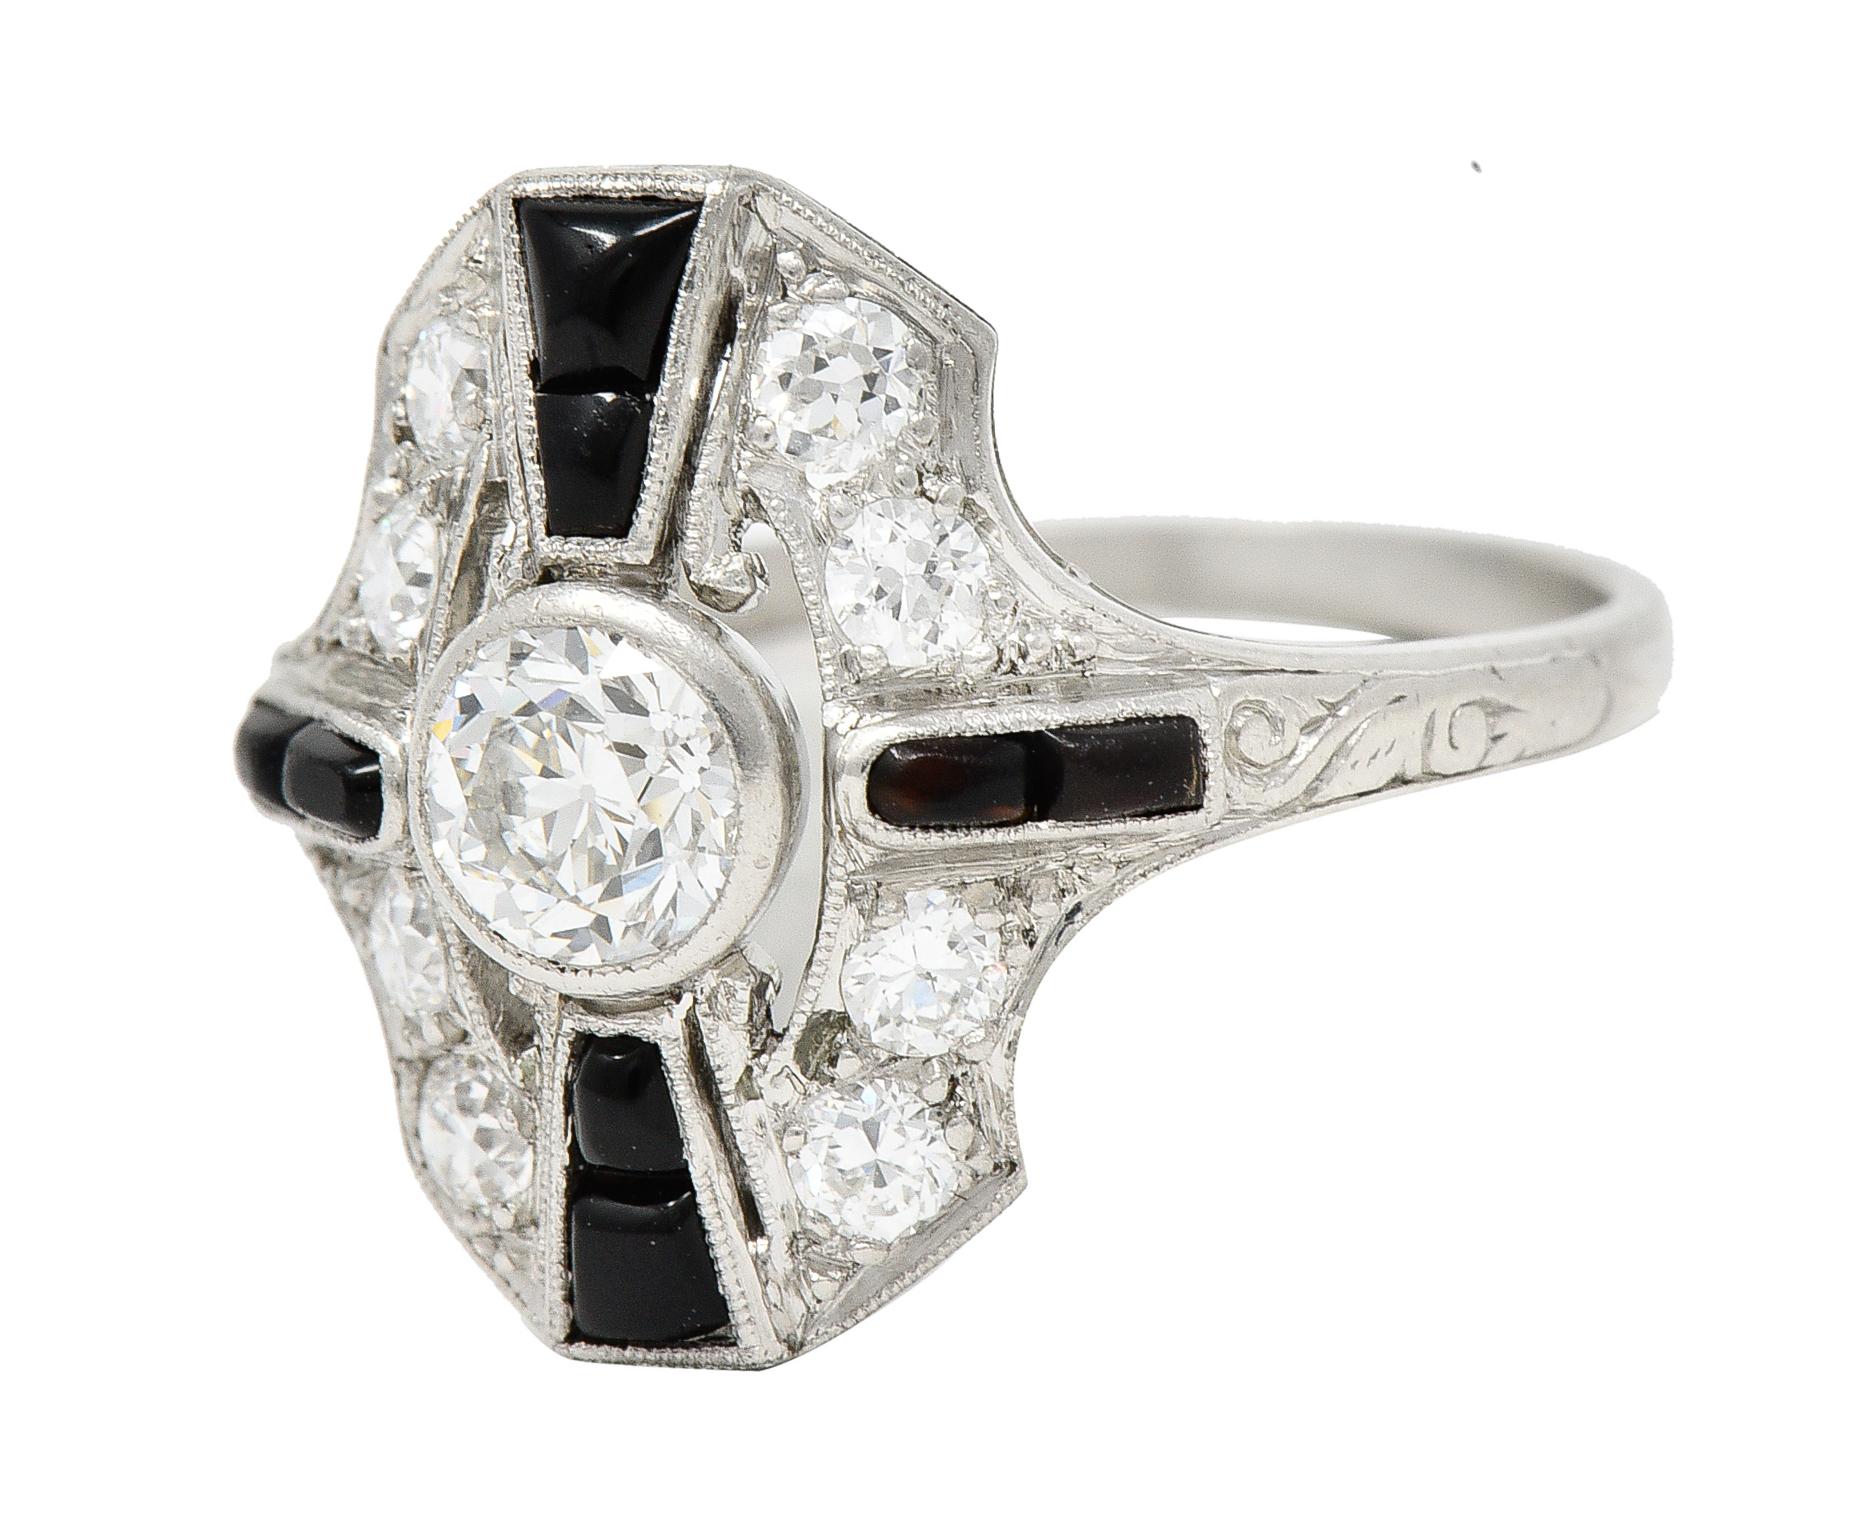 Tiffany & Co. Art Deco Old European Cut Diamond Onyx Platinum Shield Scroll Ring In Excellent Condition For Sale In Philadelphia, PA